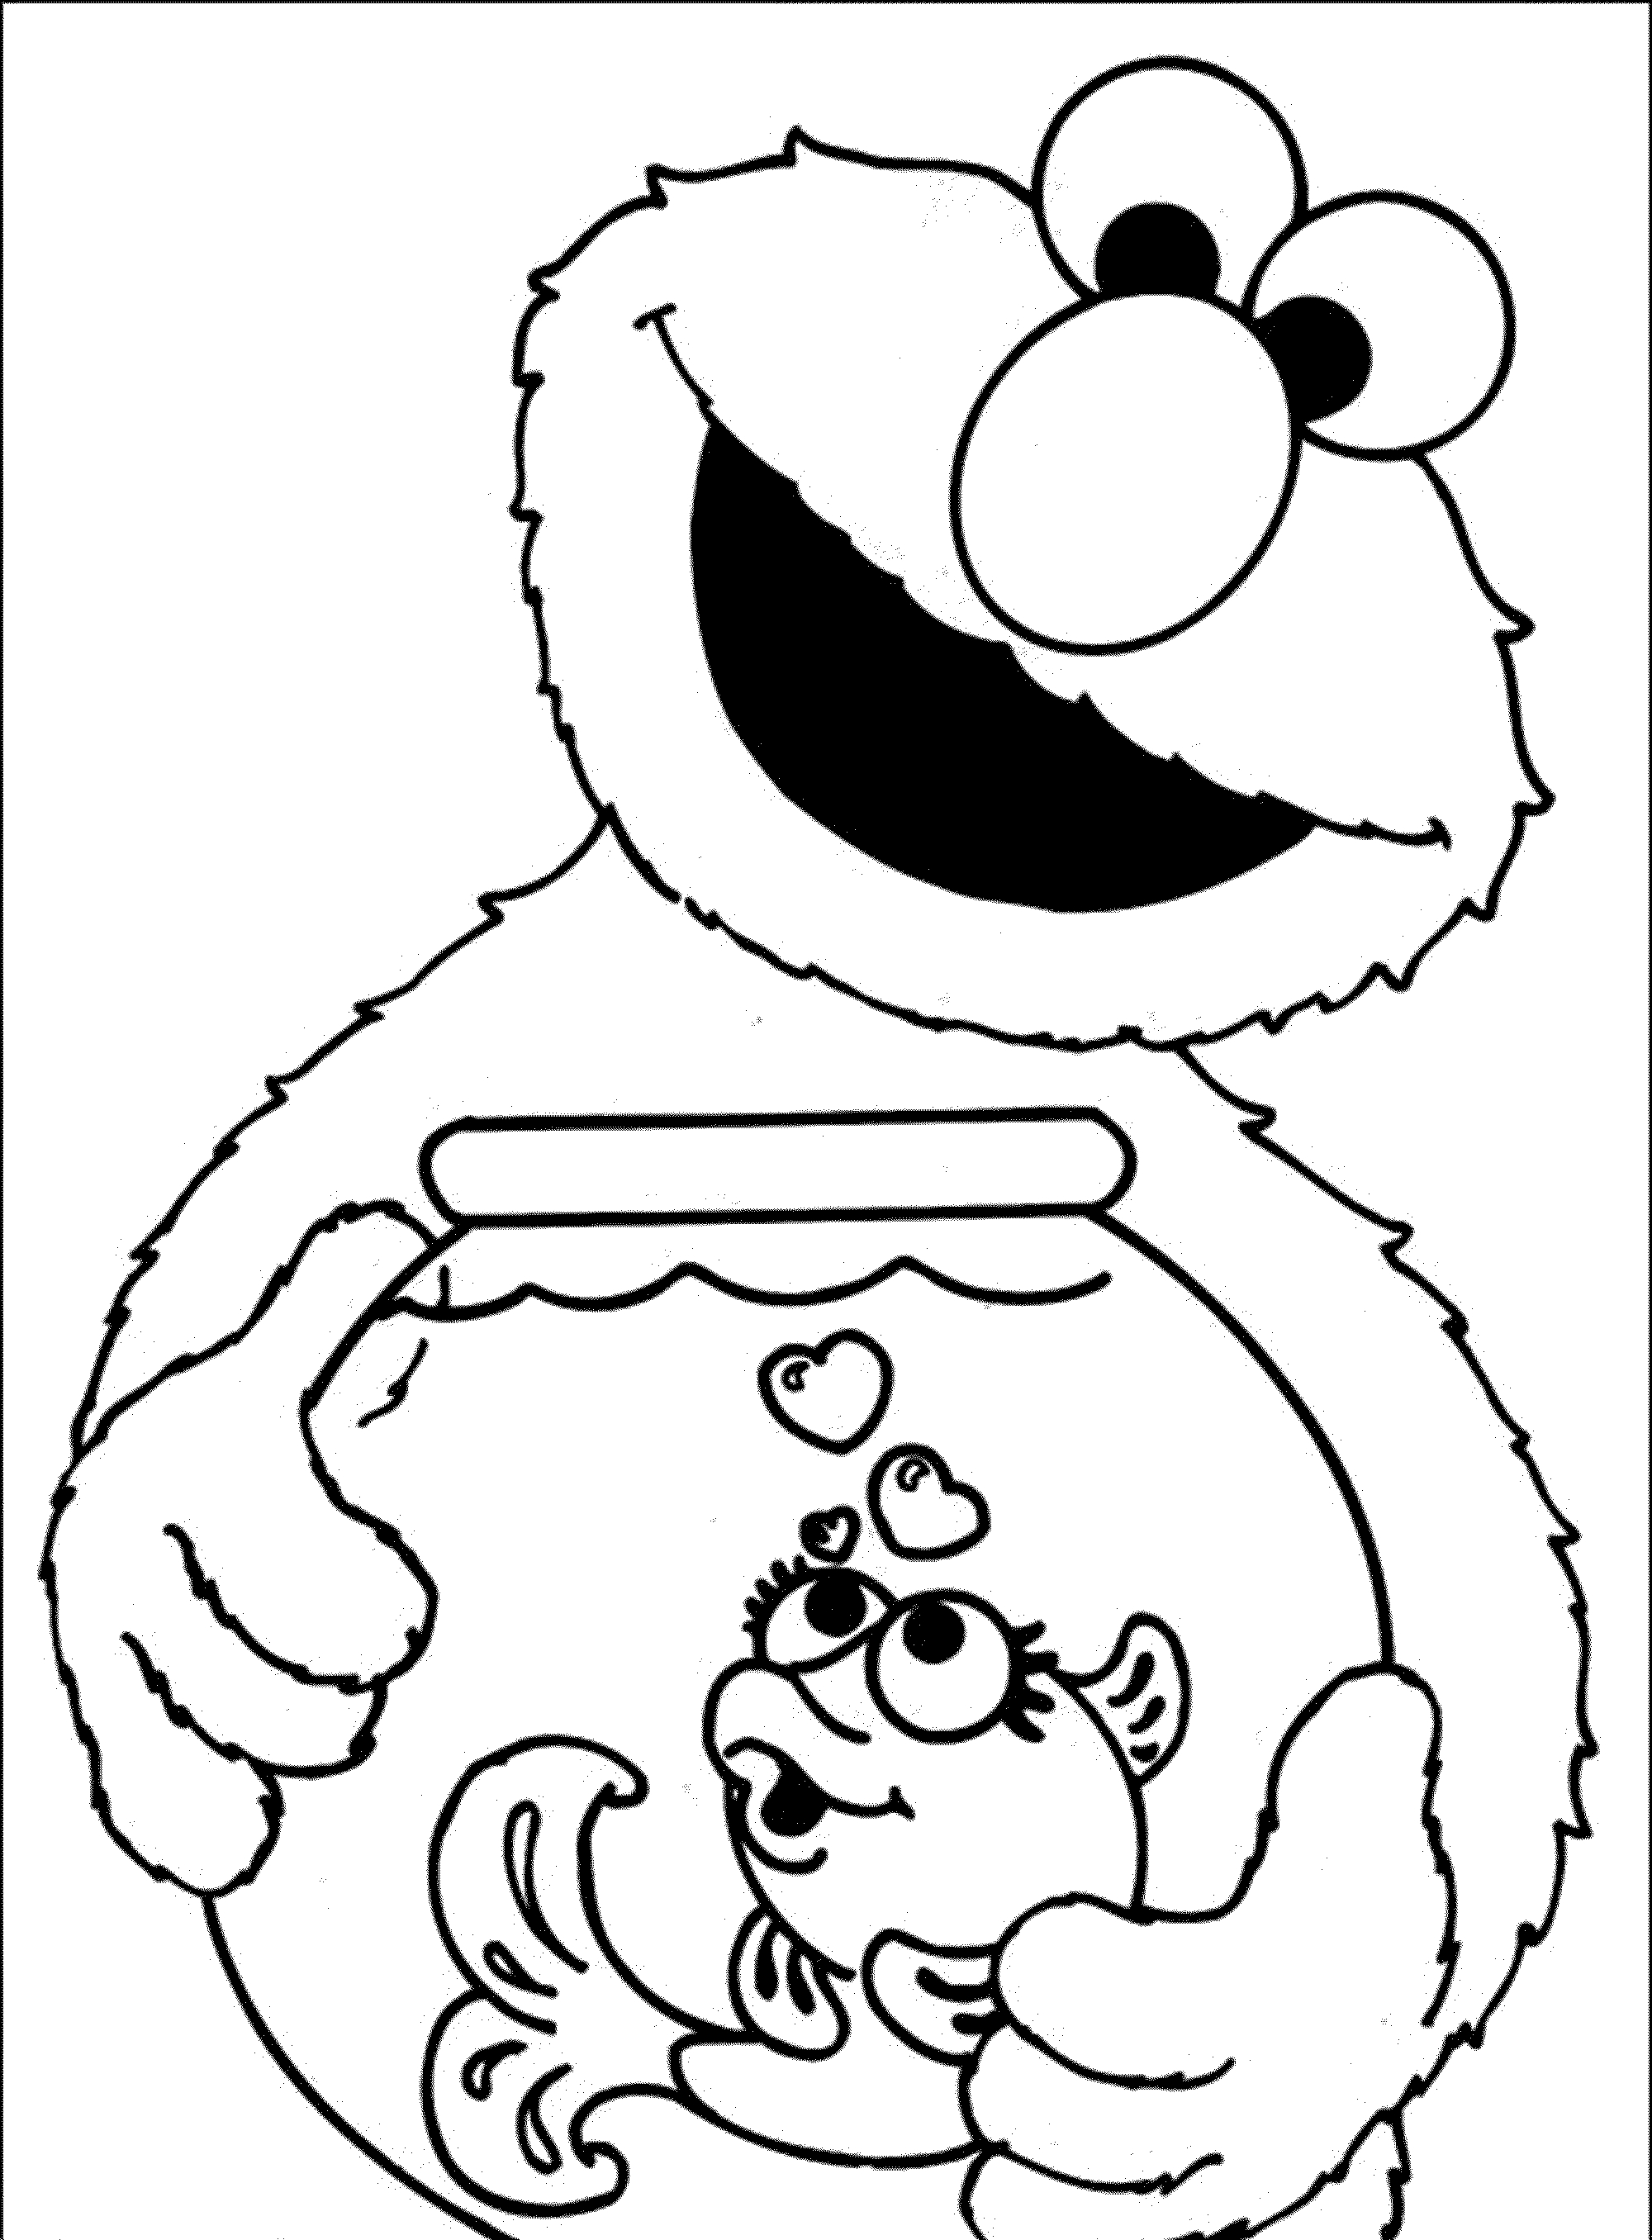 Coloring Pages Of Baby Elmo Elmo Coloring Pages For Childrens Home Activity Best Apps For Kids